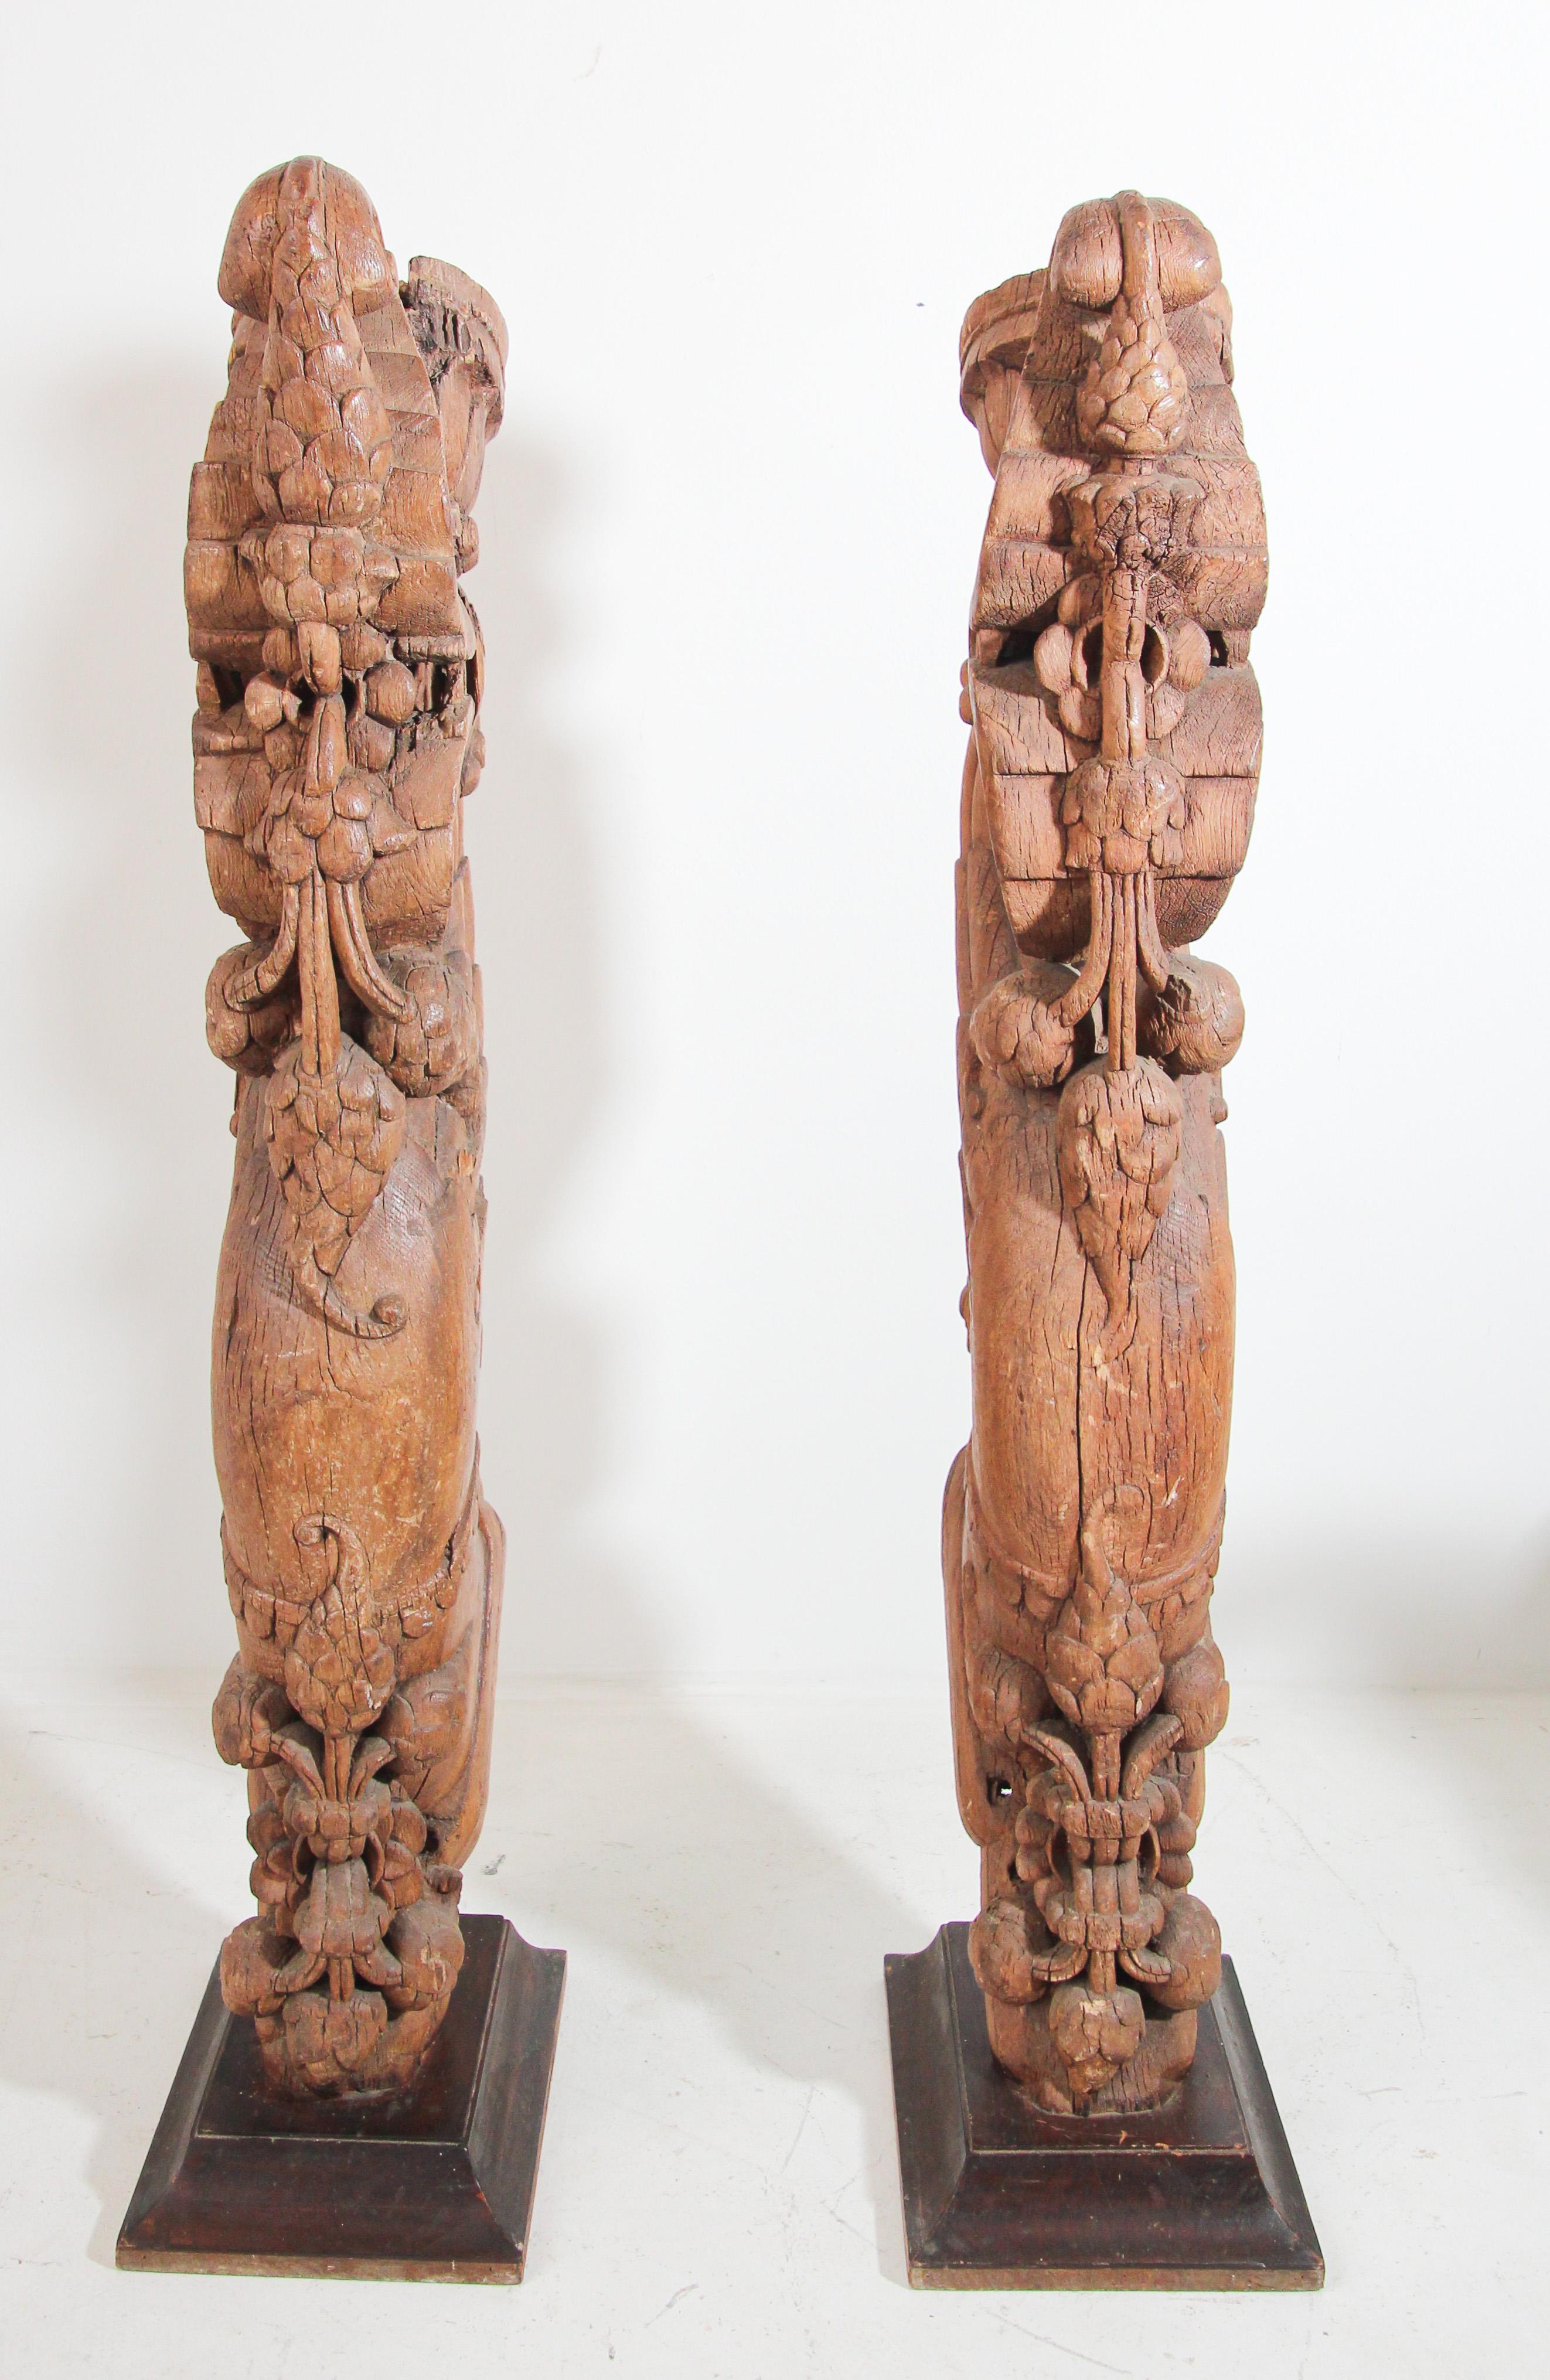 Details about   Antique Wood figurine carved Panel fine Carving early temple lintel India DECOR 